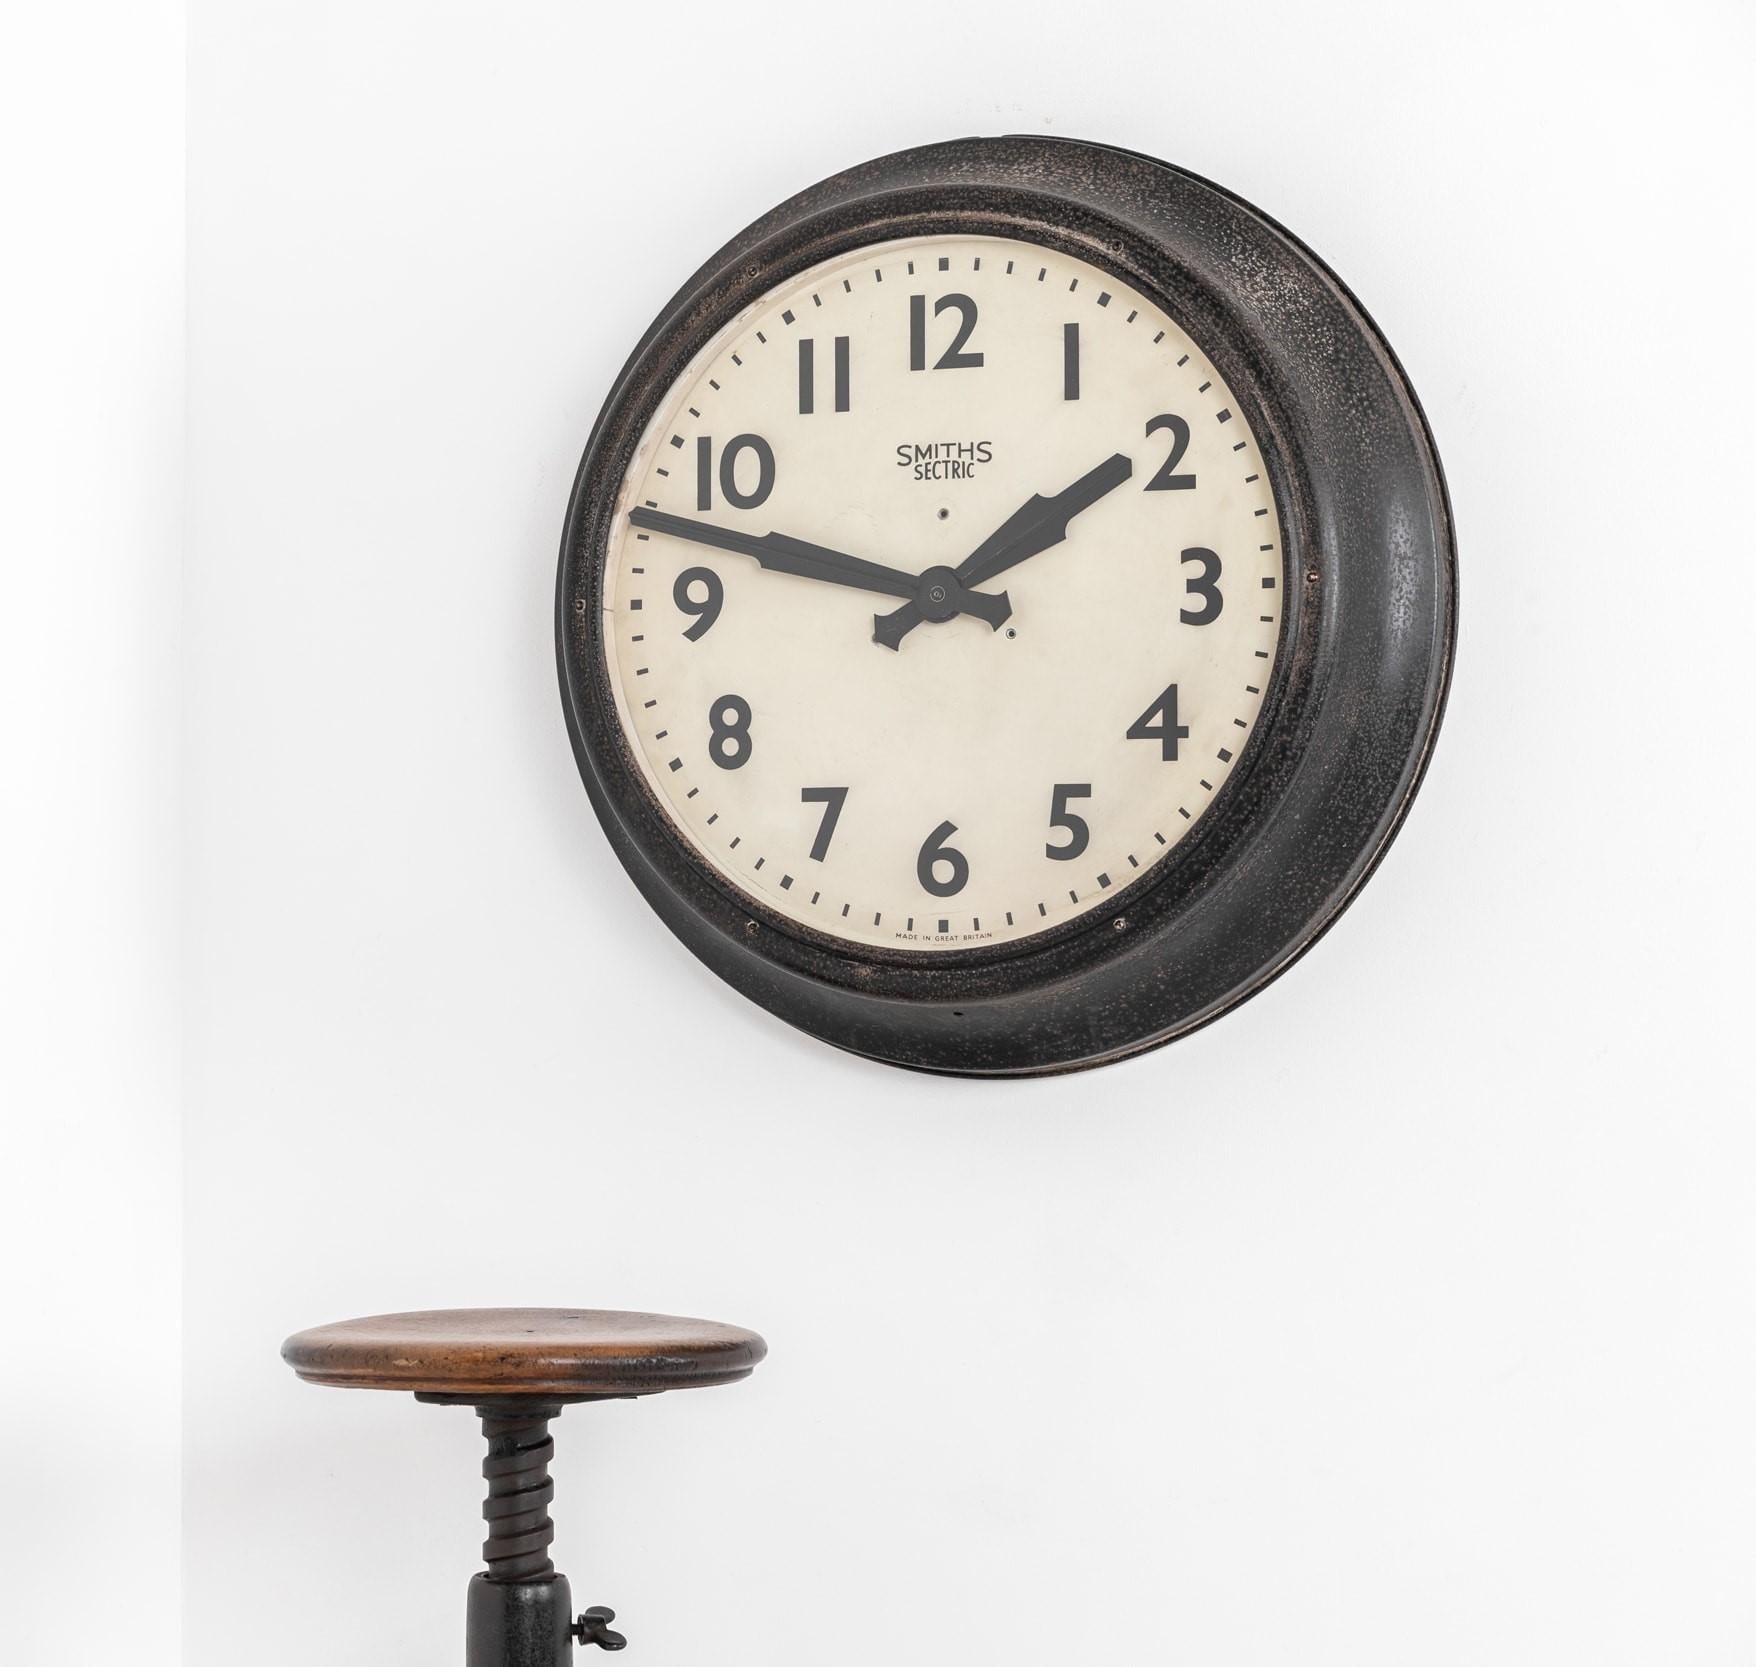 Pressed Large Vintage Industrial Art Deco Metal Smiths Electric Wall Clock, circa 1950 For Sale